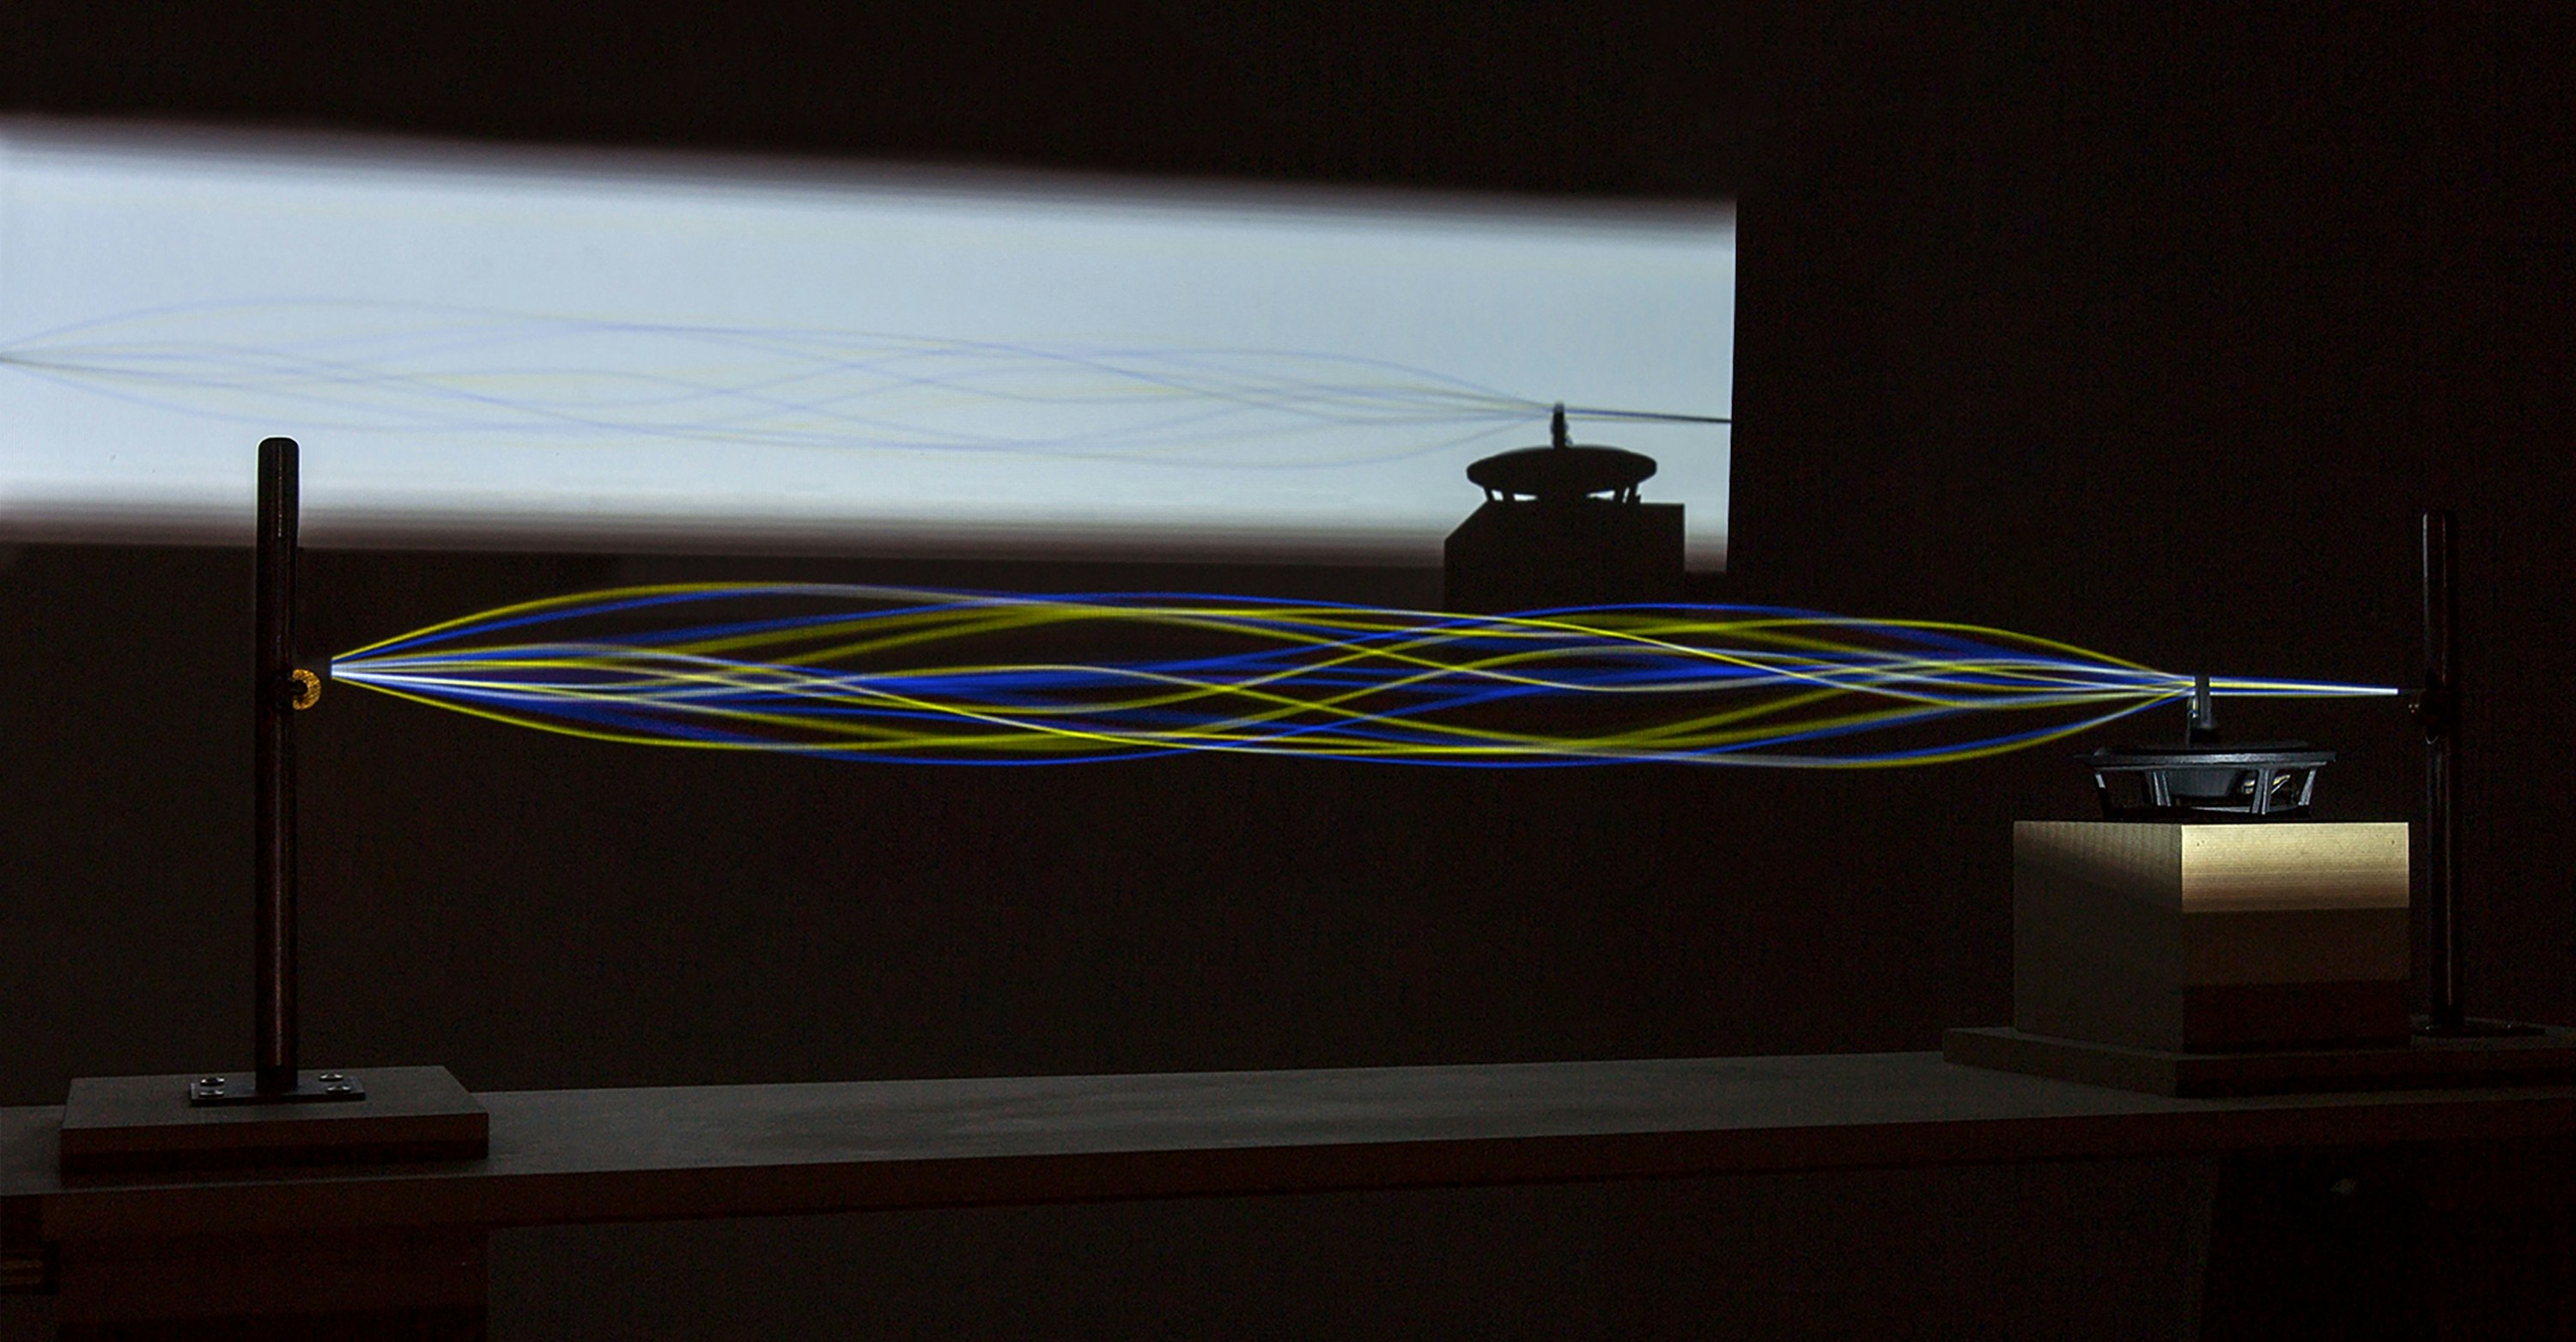 A string held between two mounted points, depicting a moving soundwave; its silhouette is projected onto a wall.